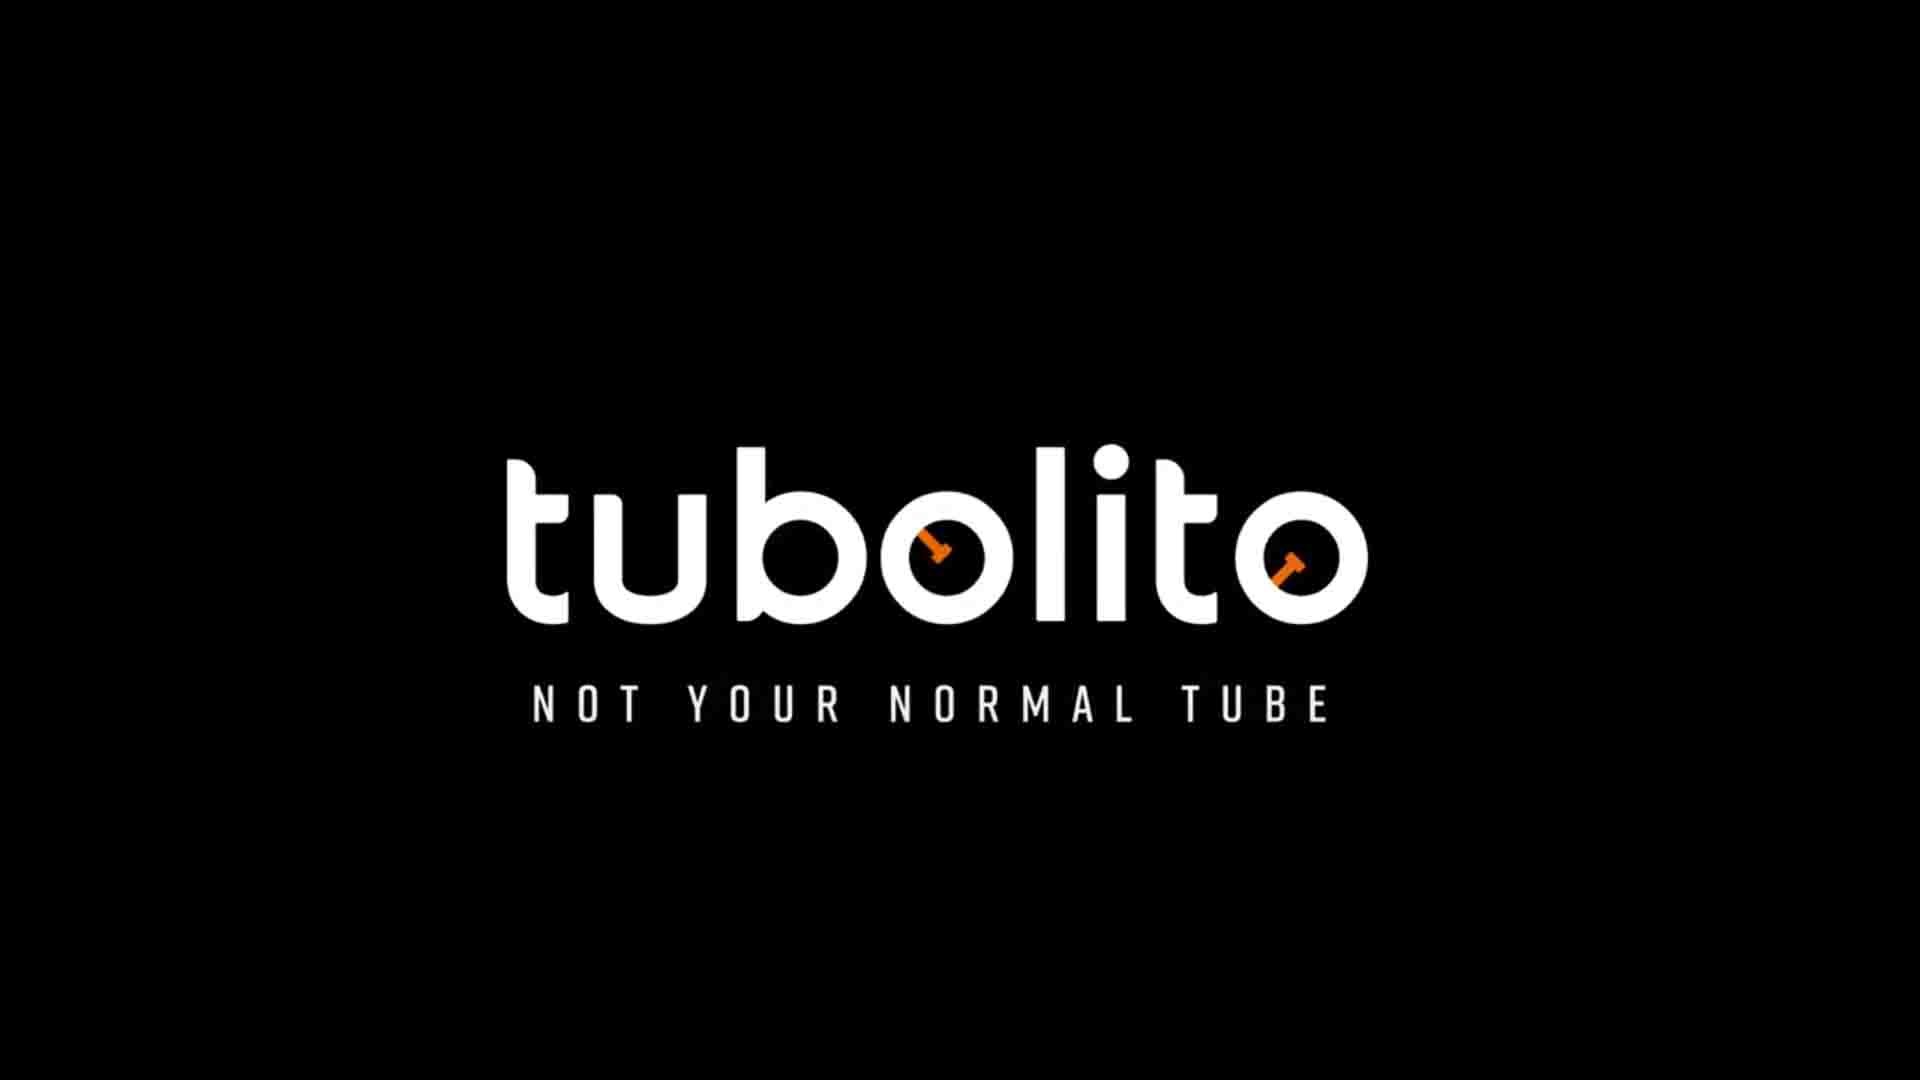 Tubolito - not your normal tube